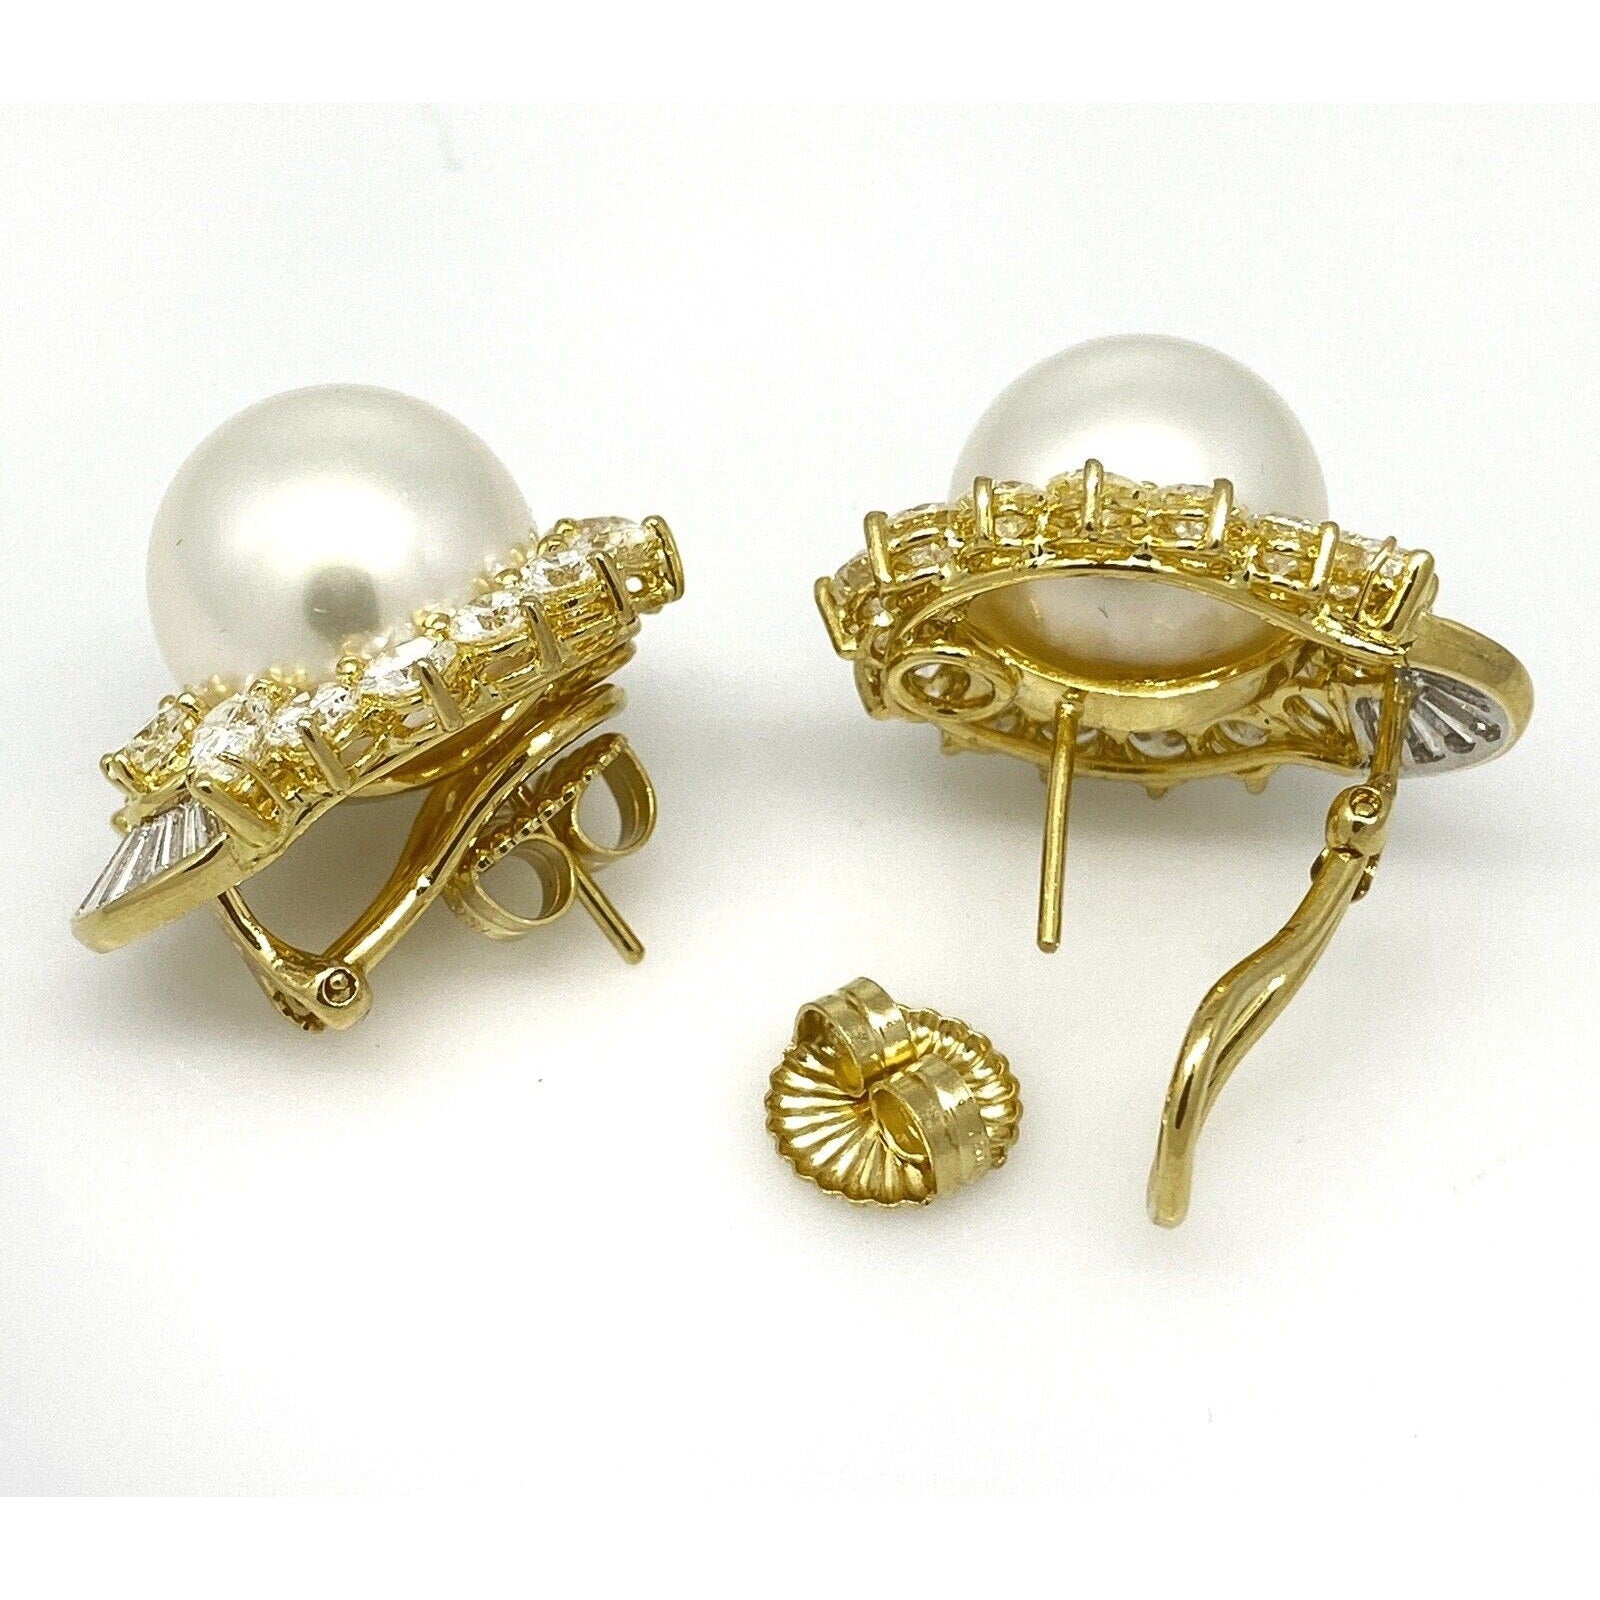 Large White South Sea Pearl and Diamond Earrings in 18k Yellow Gold